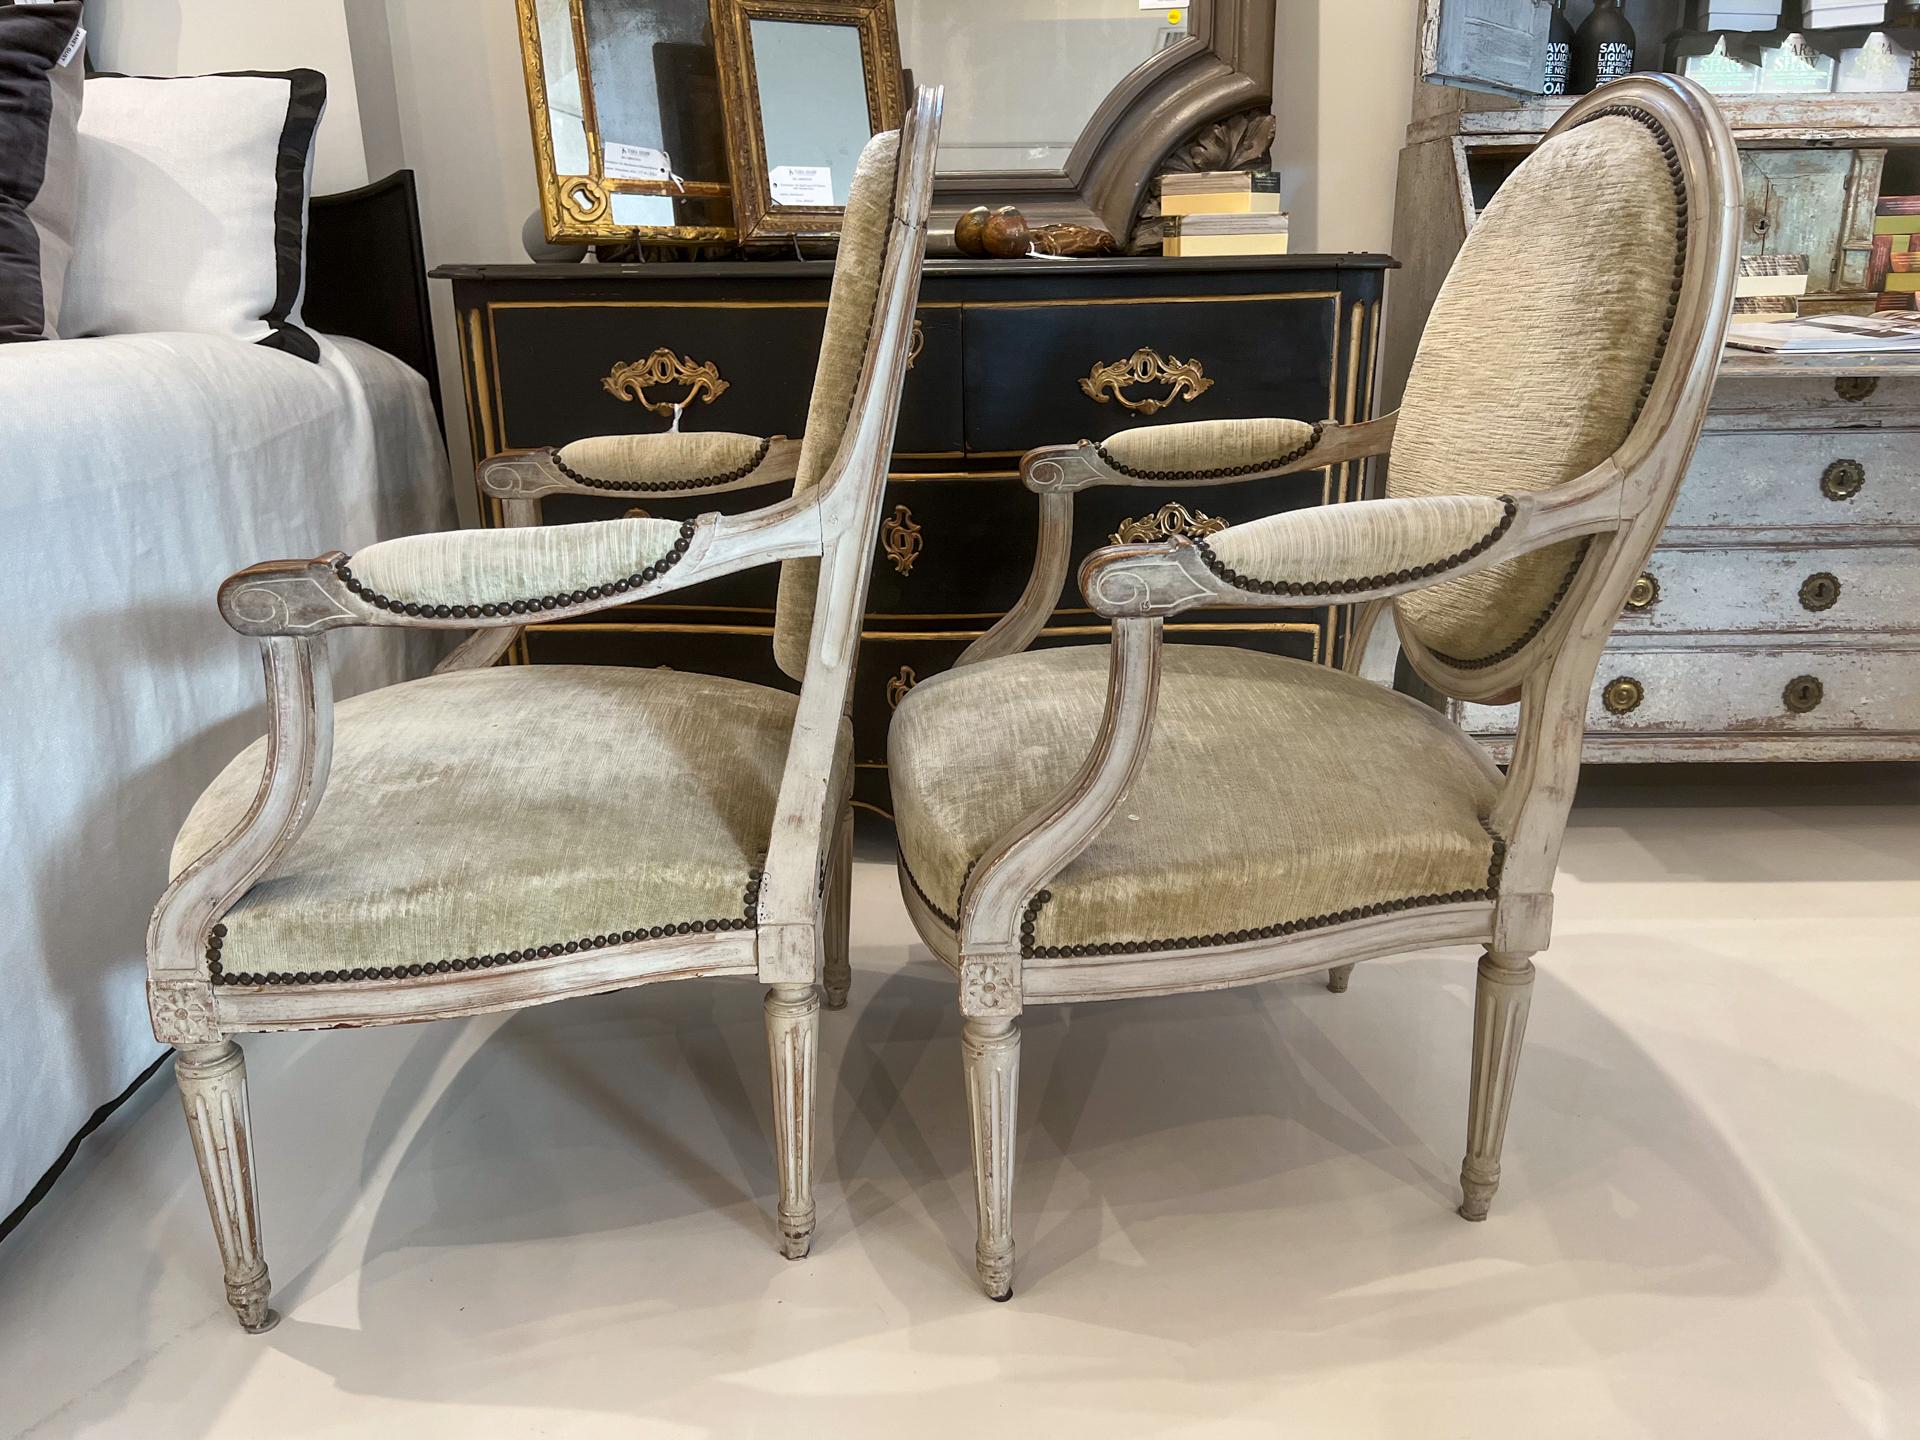 20th Century Pair of Chairs, Antique Louis XVI Style Oval Back Fauteuil